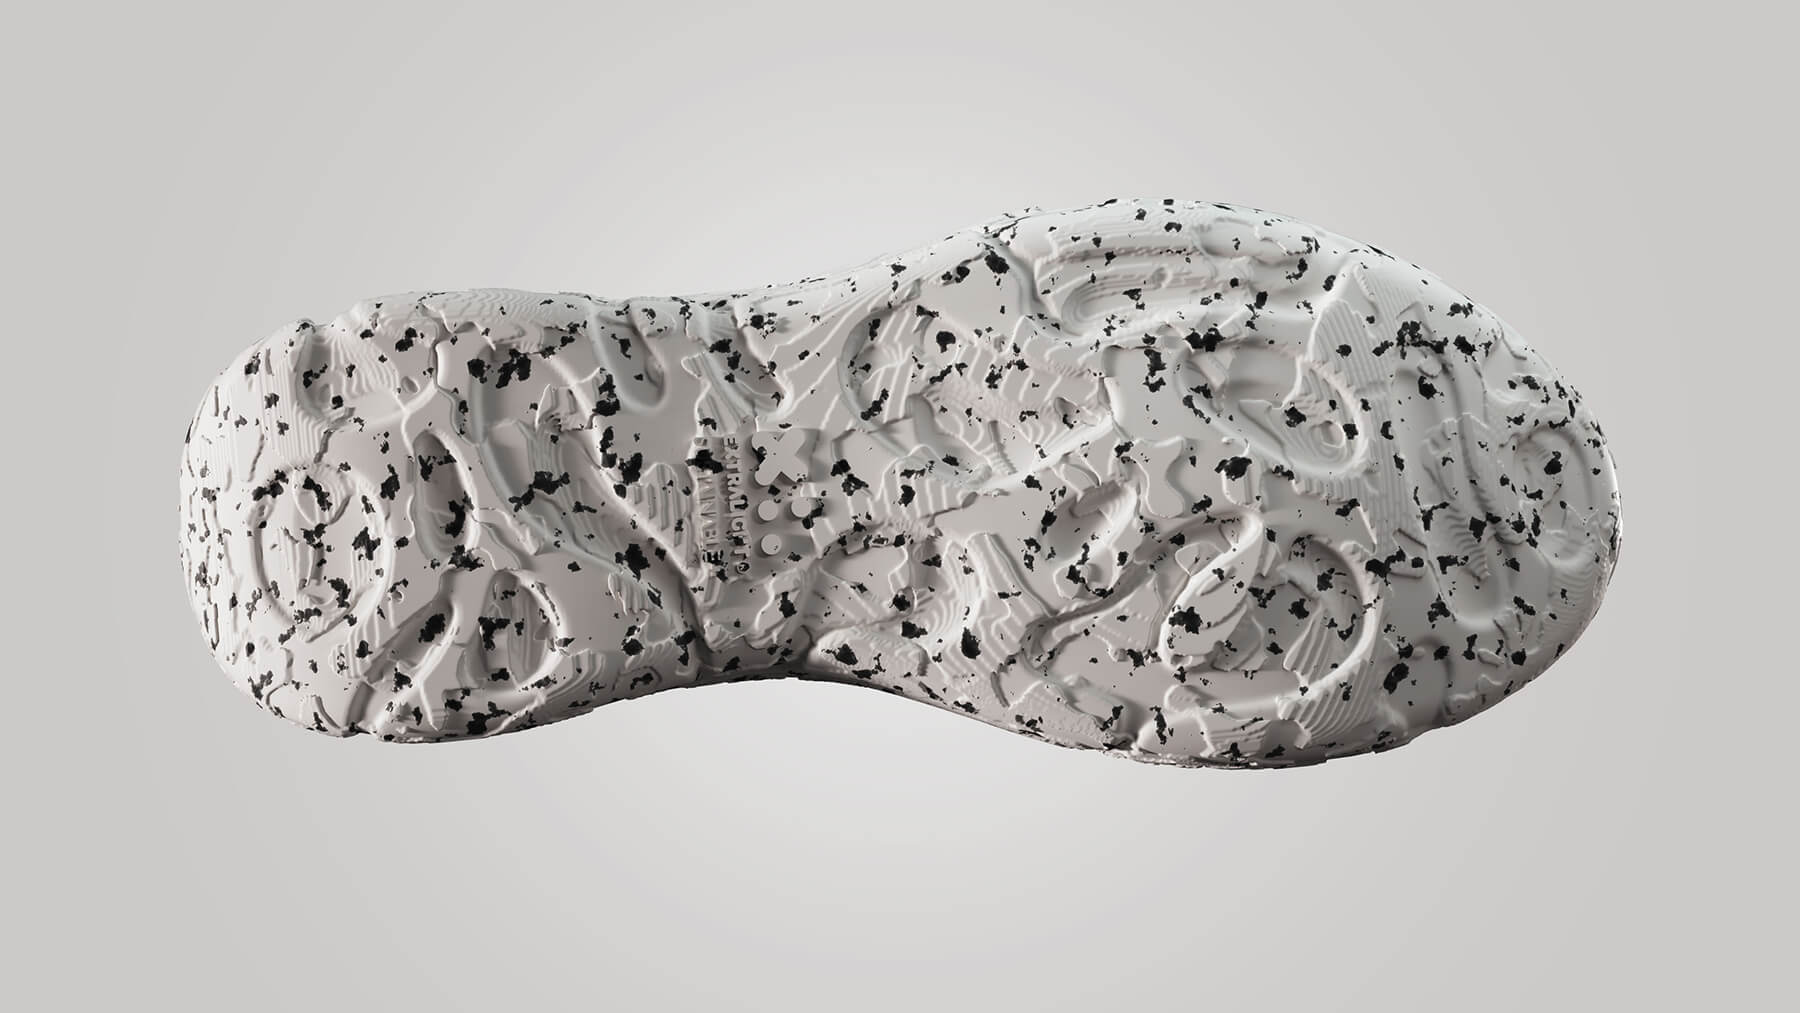 OUTSOLE_.jpg image from XIRCULAR SUSTAINABLE+ RAL7000STUDIO project created on 2021-12-01